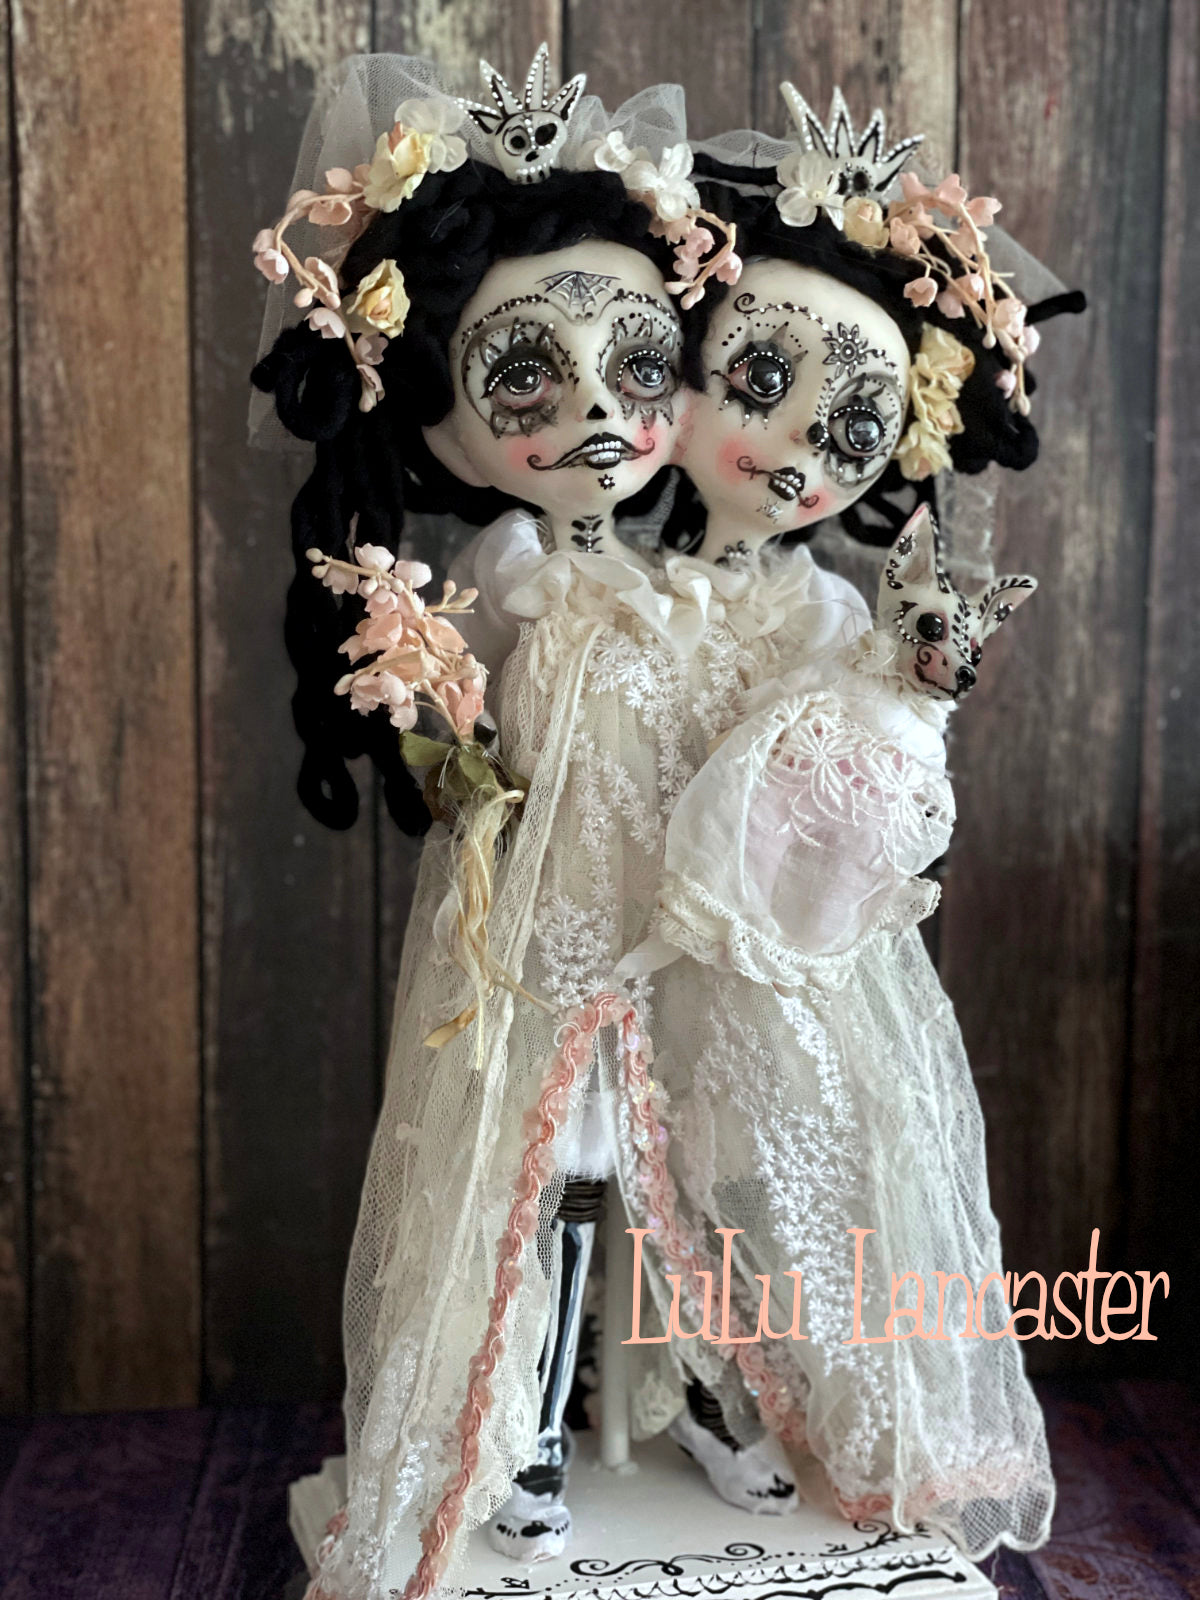 Tico and Toki Squishy head conjoined Day of the dead Original LuLu Lancaster Halloween Art Doll